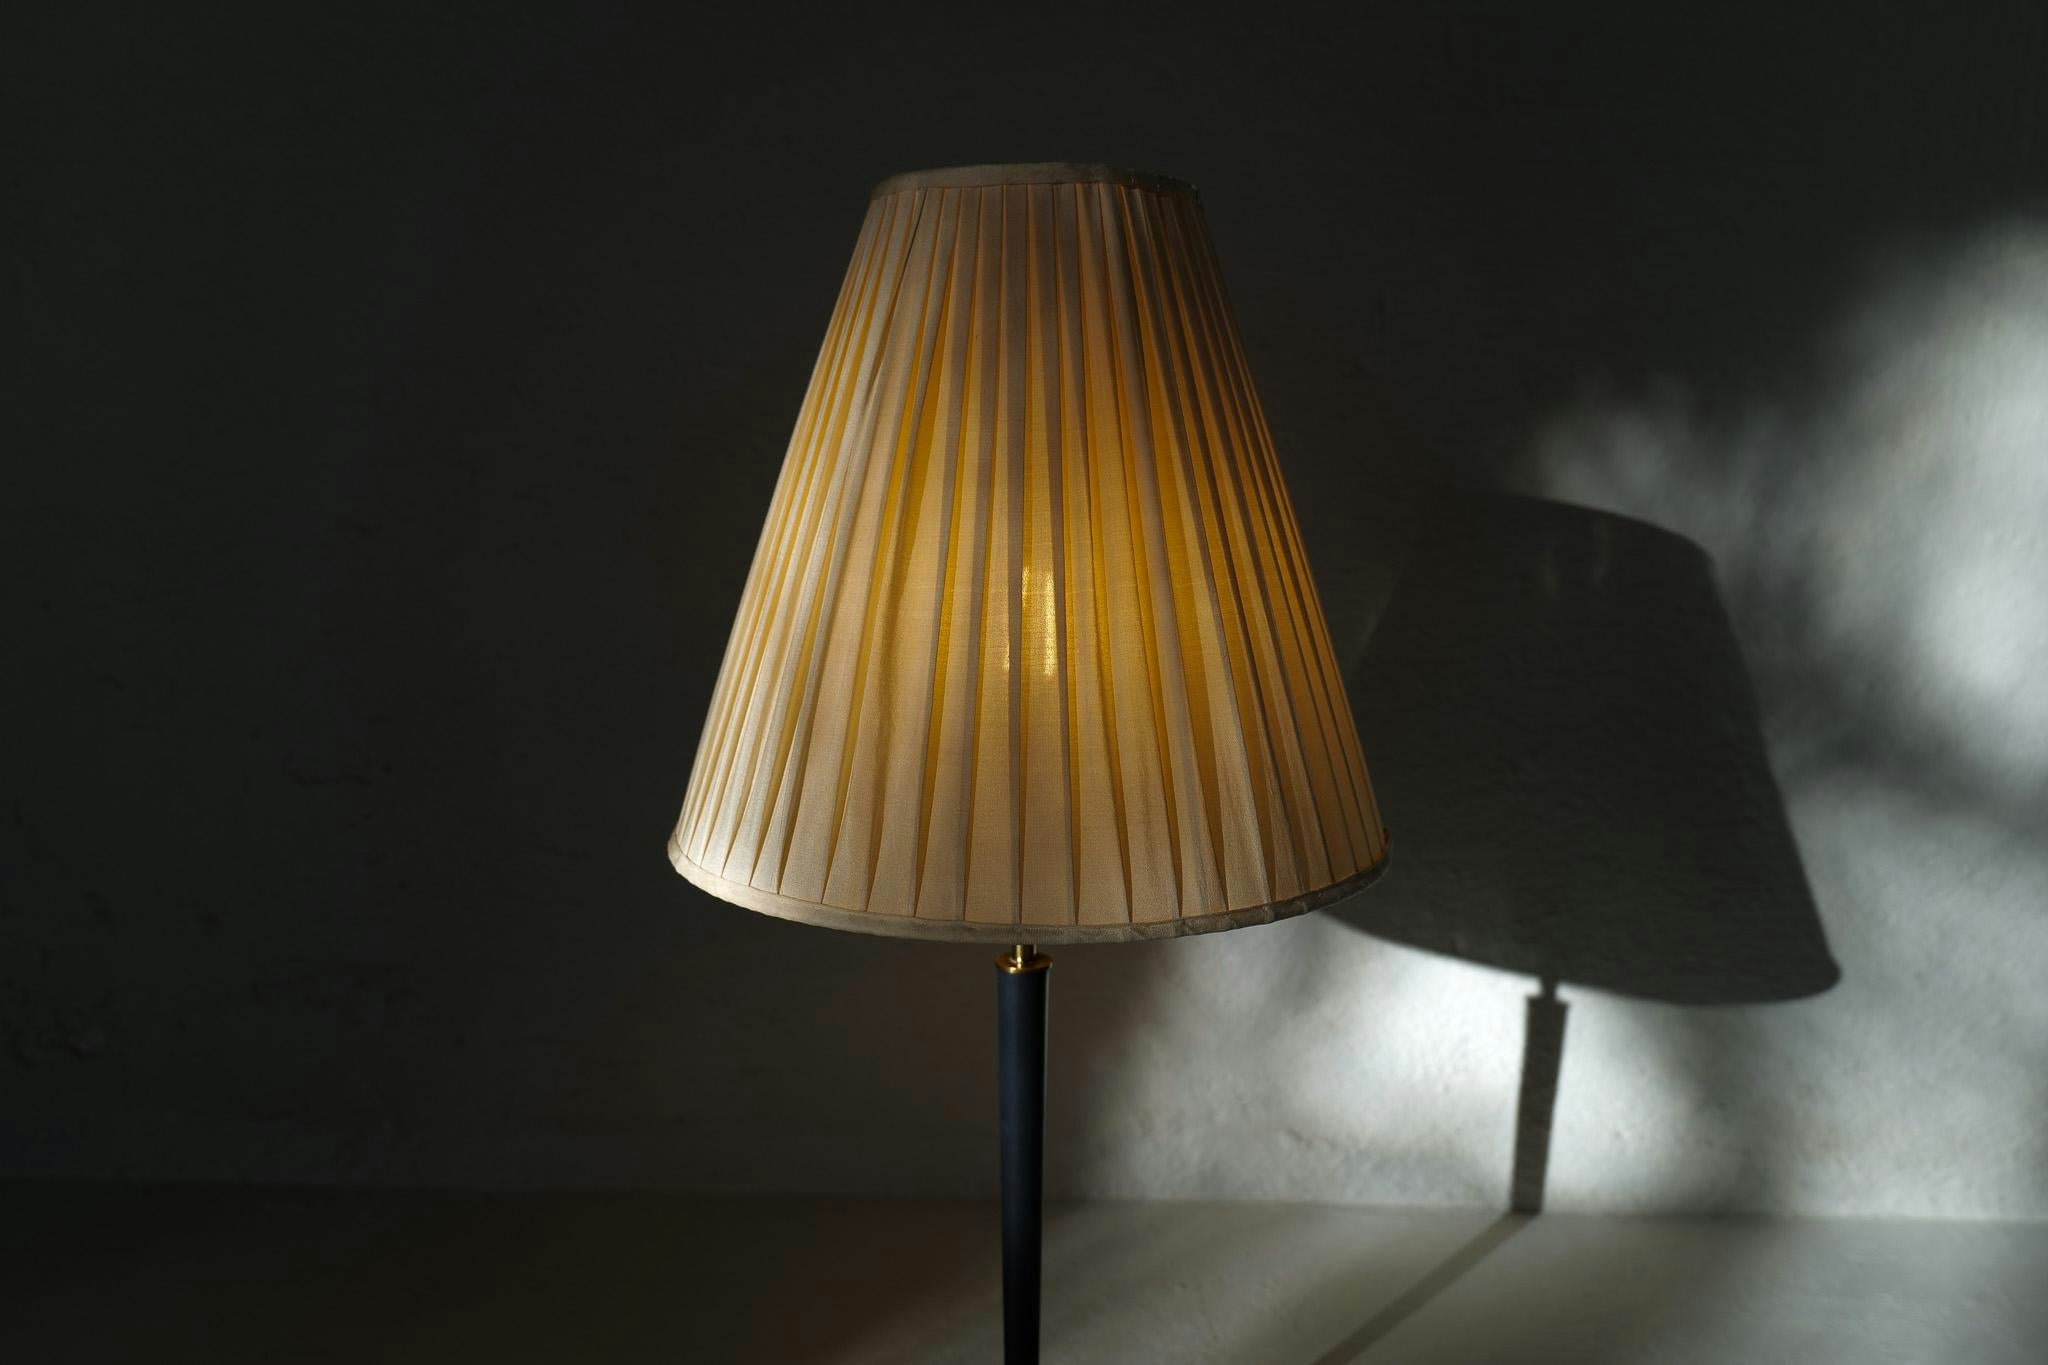 Midcentury Modern Table Lamp in Brass and Cast Iron Asea Sweden, 1950s